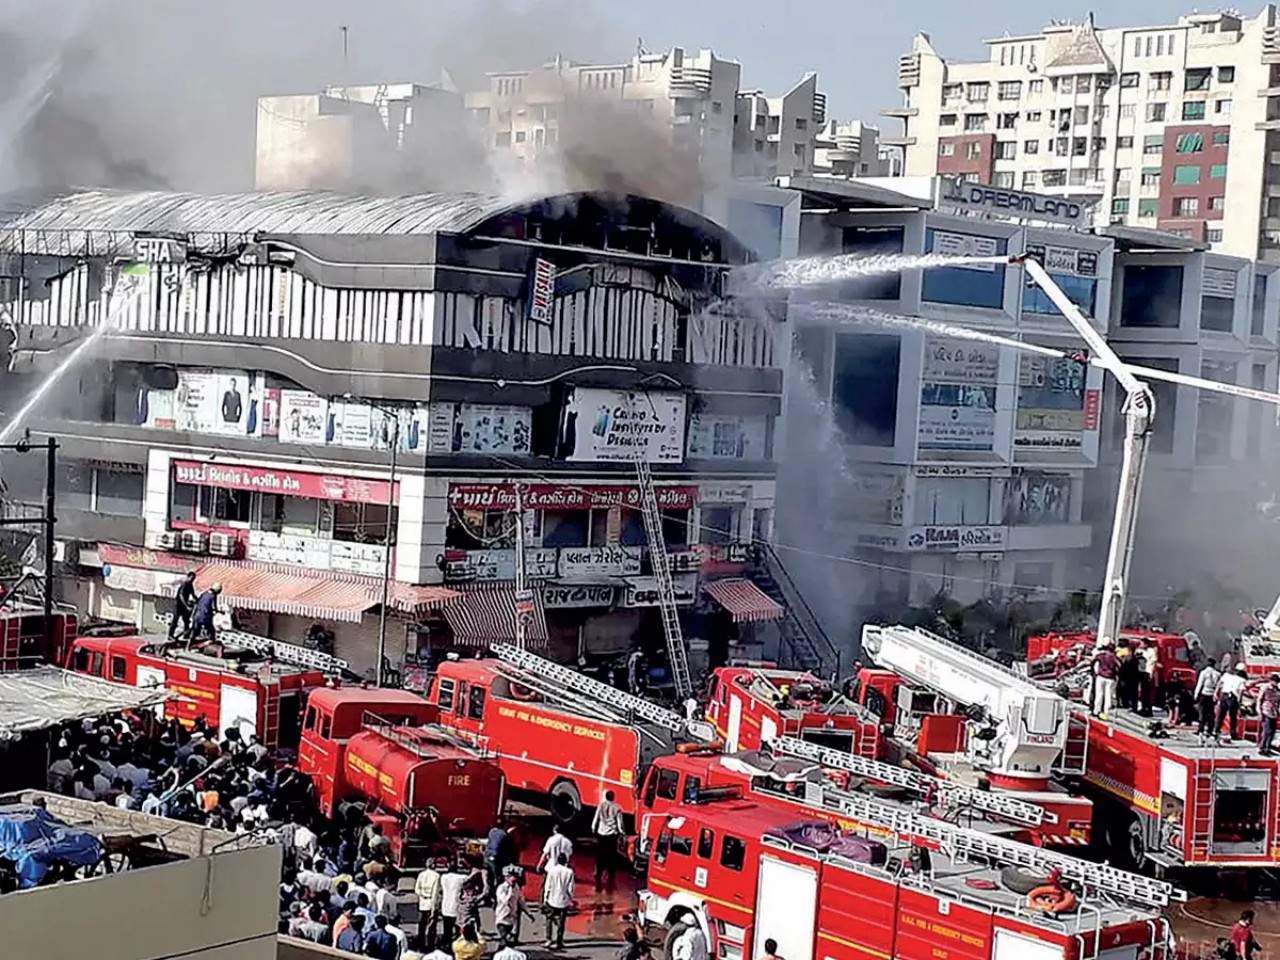 300 rescued after fire broke out in coaching center in Dwarka